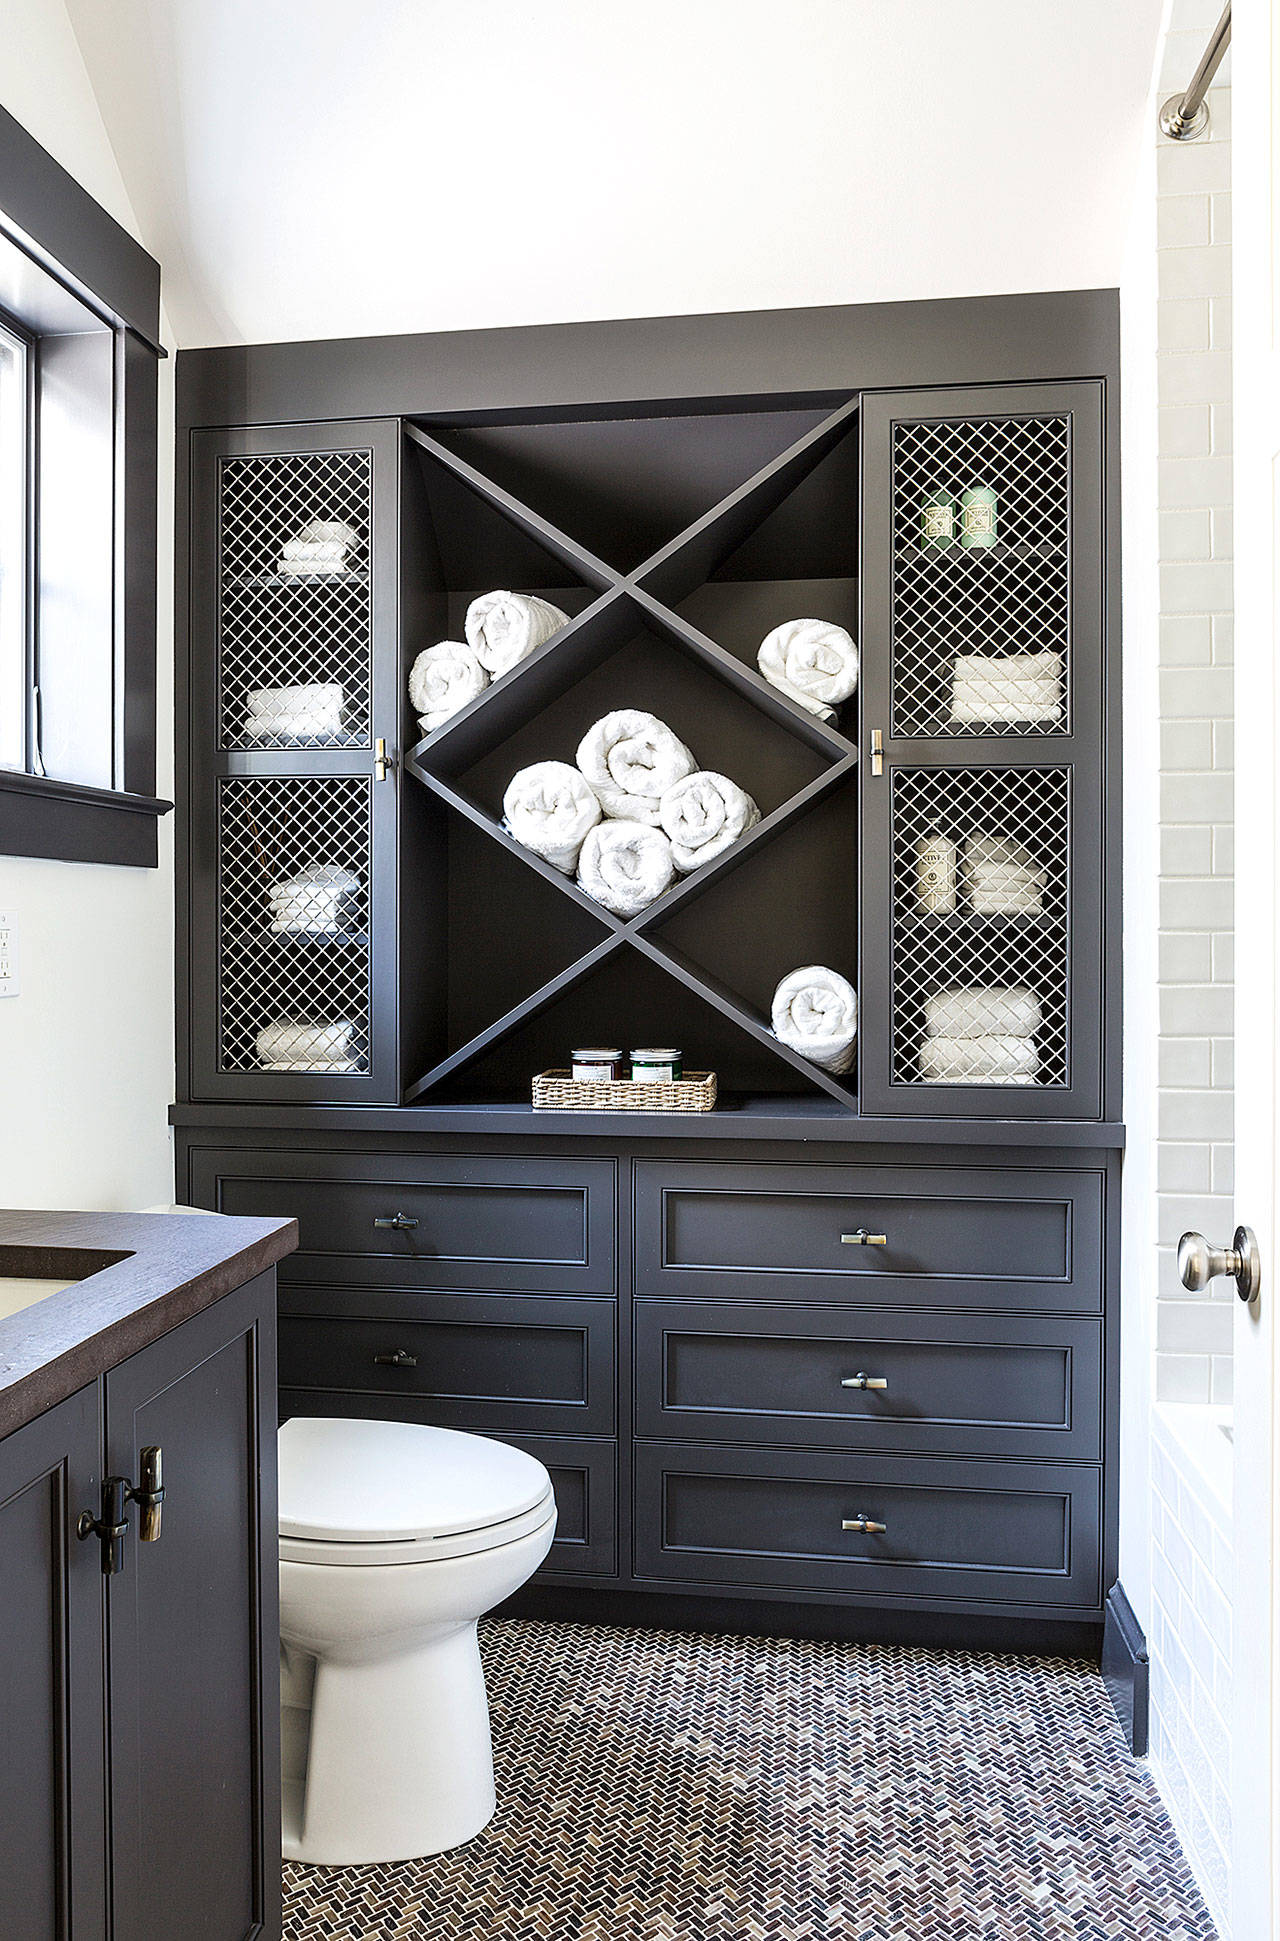 Take advantage of the vertical space in a small bathroom, designer Shazalynn Cavin-Winfrey says. A tall cabinet or a medicine cabinet over the toilet can make a big difference. (Angie Seckinger)